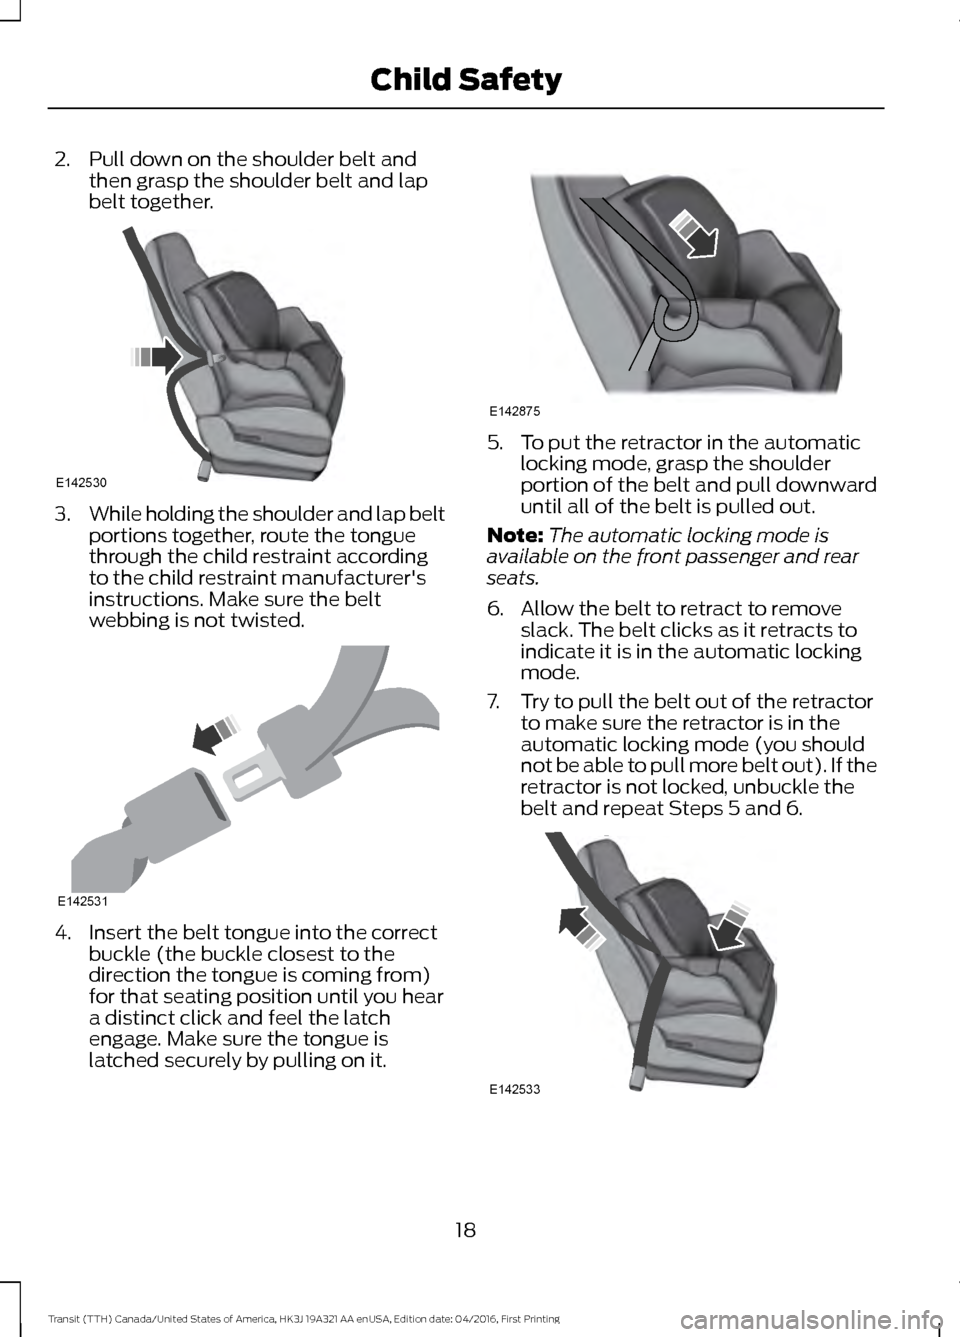 FORD TRANSIT 2017 5.G Owners Manual 2. Pull down on the shoulder belt and
then grasp the shoulder belt and lap
belt together. 3.
While holding the shoulder and lap belt
portions together, route the tongue
through the child restraint acc